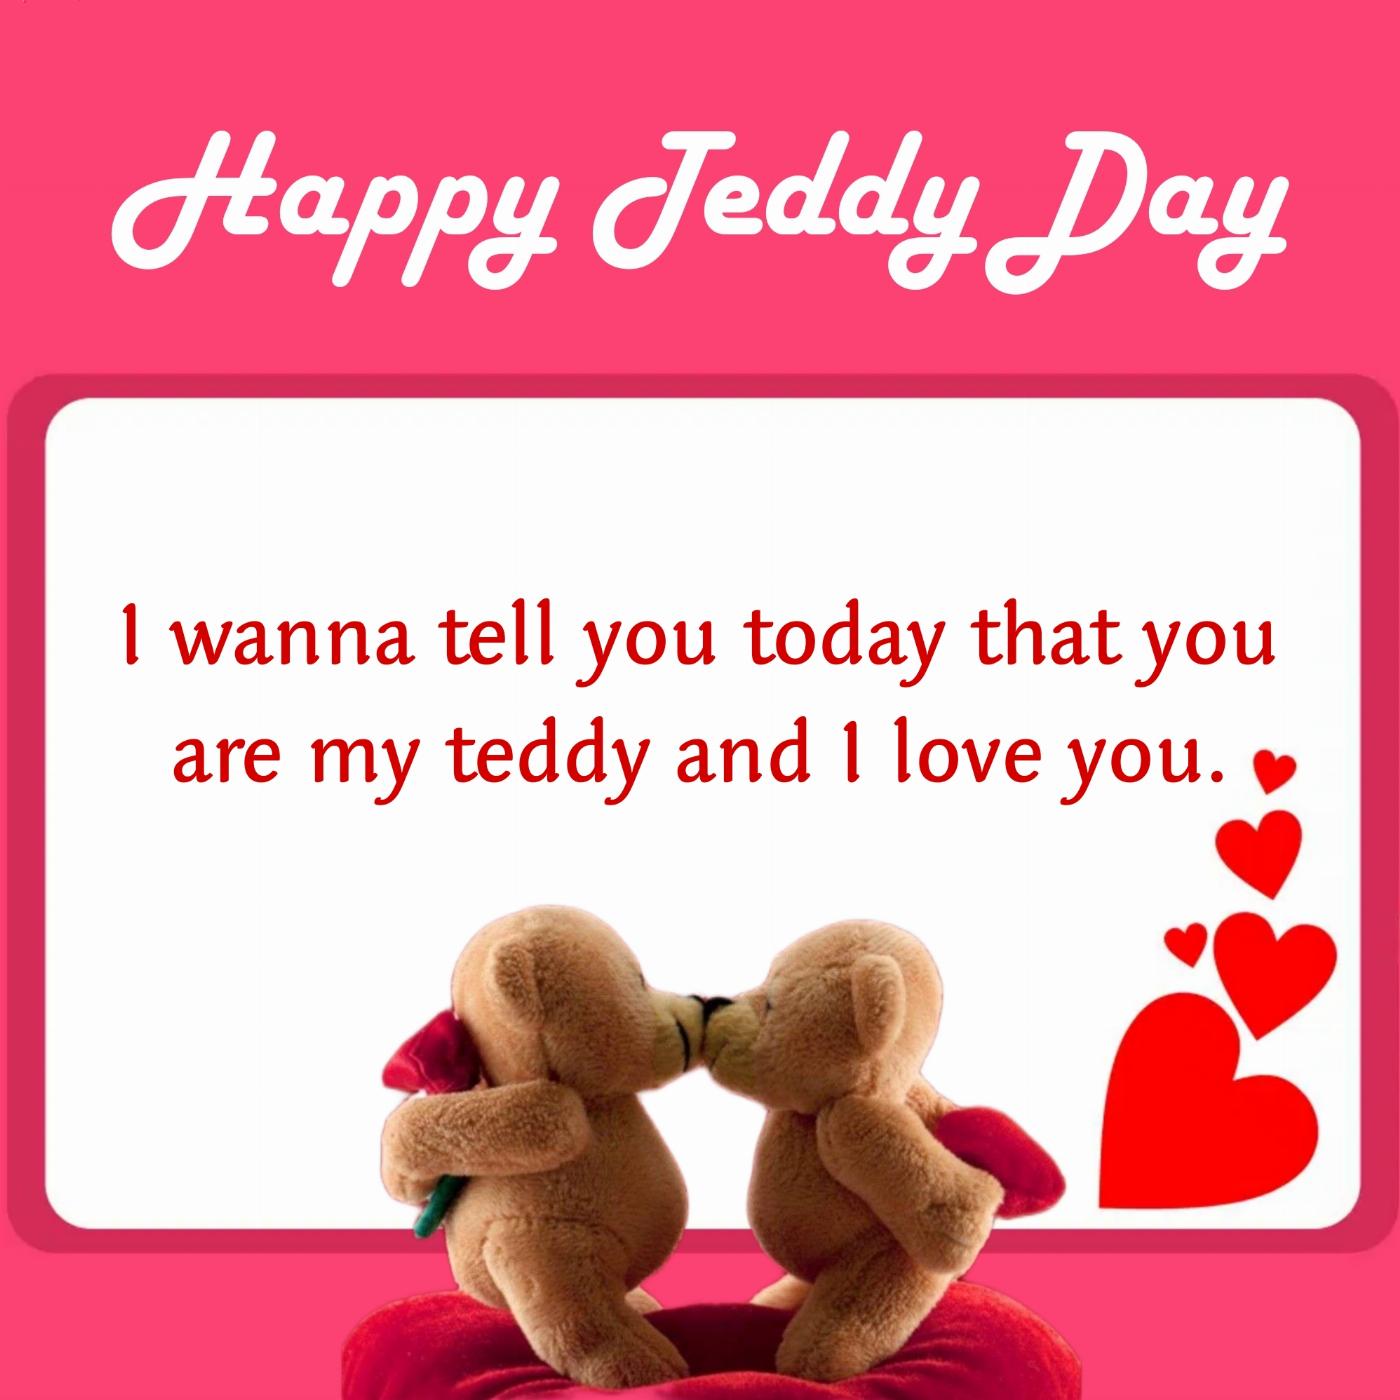 I wanna tell you today that you are my teddy